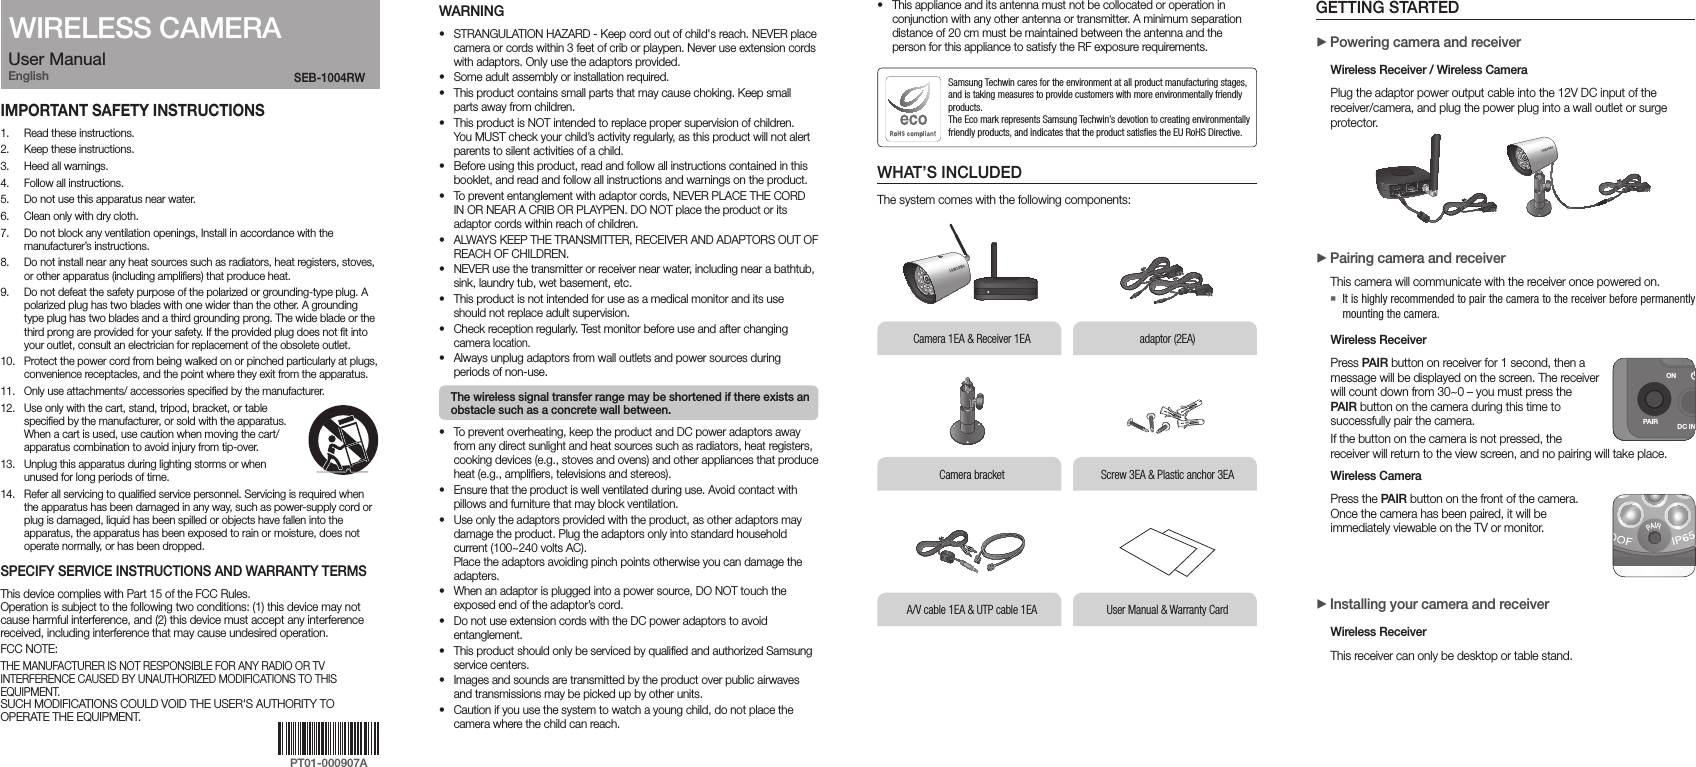 User ManualEnglishIMPORTANT SAFETY INSTRUCTIONS1.  Read these instructions.2.  Keep these instructions.3.  Heed all warnings.4.  Follow all instructions.5.  Do not use this apparatus near water.6.  Clean only with dry cloth.7.  Do not block any ventilation openings, Install in accordance with the manufacturer’s instructions.8.  Do not install near any heat sources such as radiators, heat registers, stoves, or other apparatus (including amplifiers) that produce heat.9.  Do not defeat the safety purpose of the polarized or grounding-type plug. A polarized plug has two blades with one wider than the other. A grounding type plug has two blades and a third grounding prong. The wide blade or the third prong are provided for your safety. If the provided plug does not fit into your outlet, consult an electrician for replacement of the obsolete outlet.10.  Protect the power cord from being walked on or pinched particularly at plugs, convenience receptacles, and the point where they exit from the apparatus.11.  Only use attachments/ accessories specified by the manufacturer.12.  Use only with the cart, stand, tripod, bracket, or table specified by the manufacturer, or sold with the apparatus. When a cart is used, use caution when moving the cart/apparatus combination to avoid injury from tip-over.13.  Unplug this apparatus during lighting storms or when unused for long periods of time.14.  Refer all servicing to qualified service personnel. Servicing is required when the apparatus has been damaged in any way, such as power-supply cord or plug is damaged, liquid has been spilled or objects have fallen into the apparatus, the apparatus has been exposed to rain or moisture, does not operate normally, or has been dropped.SPECIFY SERVICE INSTRUCTIONS AND WARRANTY TERMSThis device complies with Part 15 of the FCC Rules. Operation is subject to the following two conditions: (1) this device may not cause harmful interference, and (2) this device must accept any interference received, including interference that may cause undesired operation.FCC NOTE:THE MANUFACTURER IS NOT RESPONSIBLE FOR ANY RADIO OR TV INTERFERENCE CAUSED BY UNAUTHORIZED MODIFICATIONS TO THIS EQUIPMENT. SUCH MODIFICATIONS COULD VOID THE USER&apos;S AUTHORITY TO OPERATE THE EQUIPMENT.SEB-1004RW WARNING• STRANGULATION HAZARD - Keep cord out of child&apos;s reach. NEVER place camera or cords within 3 feet of crib or playpen. Never use extension cords with adaptors. Only use the adaptors provided.• Some adult assembly or installation required.• This product contains small parts that may cause choking. Keep small parts away from children.• This product is NOT intended to replace proper supervision of children.  You MUST check your child’s activity regularly, as this product will not alert parents to silent activities of a child.• Before using this product, read and follow all instructions contained in this booklet, and read and follow all instructions and warnings on the product. • To prevent entanglement with adaptor cords, NEVER PLACE THE CORD IN OR NEAR A CRIB OR PLAYPEN. DO NOT place the product or its adaptor cords within reach of children.• ALWAYS KEEP THE TRANSMITTER, RECEIVER AND ADAPTORS OUT OF REACH OF CHILDREN.• NEVER use the transmitter or receiver near water, including near a bathtub, sink, laundry tub, wet basement, etc.• This product is not intended for use as a medical monitor and its use should not replace adult supervision.• Check reception regularly. Test monitor before use and after changing camera location.• Always unplug adaptors from wall outlets and power sources during periods of non-use. The wireless signal transfer range may be shortened if there exists an obstacle such as a concrete wall between.• To prevent overheating, keep the product and DC power adaptors away from any direct sunlight and heat sources such as radiators, heat registers, cooking devices (e.g., stoves and ovens) and other appliances that produce heat (e.g., amplifiers, televisions and stereos).• Ensure that the product is well ventilated during use. Avoid contact with pillows and furniture that may block ventilation.• Use only the adaptors provided with the product, as other adaptors may damage the product. Plug the adaptors only into standard household current (100~240 volts AC).  Place the adaptors avoiding pinch points otherwise you can damage the adapters.• When an adaptor is plugged into a power source, DO NOT touch the exposed end of the adaptor’s cord.• Do not use extension cords with the DC power adaptors to avoid entanglement.• This product should only be serviced by qualified and authorized Samsung service centers.• Images and sounds are transmitted by the product over public airwaves and transmissions may be picked up by other units.• Caution if you use the system to watch a young child, do not place the camera where the child can reach.• This appliance and its antenna must not be collocated or operation in conjunction with any other antenna or transmitter. A minimum separation distance of 20 cm must be maintained between the antenna and the person for this appliance to satisfy the RF exposure requirements.WHAT’S INCLUDEDThe system comes with the following components:Samsung Techwin cares for the environment at all product manufacturing stages, and is taking measures to provide customers with more environmentally friendly products. The Eco mark represents Samsung Techwin’s devotion to creating environmentally friendly products, and indicates that the product satisfies the EU RoHS Directive. GETTING STARTED  +Powering camera and receiver Wireless Receiver / Wireless Camera Plug the adaptor power output cable into the 12V DC input of the receiver/camera, and plug the power plug into a wall outlet or surge protector. +Pairing camera and receiverThis camera will communicate with the receiver once powered on. `It is highly recommended to pair the camera to the receiver before permanently mounting the camera.Wireless Receiver Press PAIR button on receiver for 1 second, then a message will be displayed on the screen. The receiver will count down from 30~0 – you must press the PAIR button on the camera during this time to successfully pair the camera.If the button on the camera is not pressed, the receiver will return to the view screen, and no pairing will take place.Wireless Camera Press the PAIR button on the front of the camera. Once the camera has been paired, it will be immediately viewable on the TV or monitor. +Installing your camera and receiver Wireless Receiver This receiver can only be desktop or table stand.WIRELESS CAMERAlCamera 1EA &amp; Receiver 1EA adaptor (2EA)User Manual &amp; Warranty CardA/V cable 1EA &amp; UTP cable 1EA Camera bracketlScrew 3EA &amp; Plastic anchor 3EAON OFFPAIR DC IN 12V AV OUT DVR CAMERAPAIRSEB-1004RWlPAIRDC IN 12V AV OUTDVR CAMERAON OFFPT01-000907A